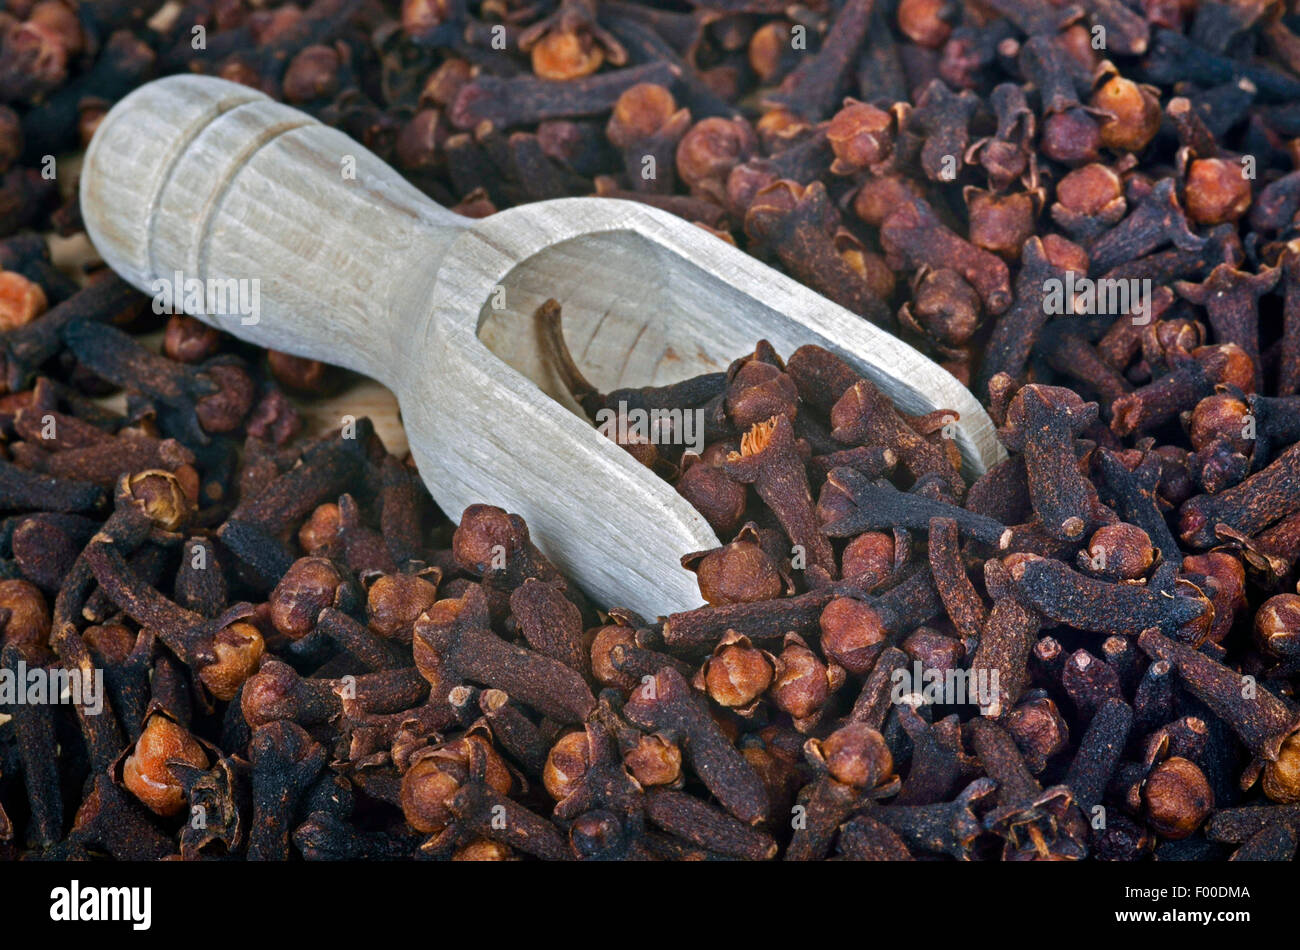 Clove (Syzygium aromaticum), dried cloves with wood scoop Stock Photo